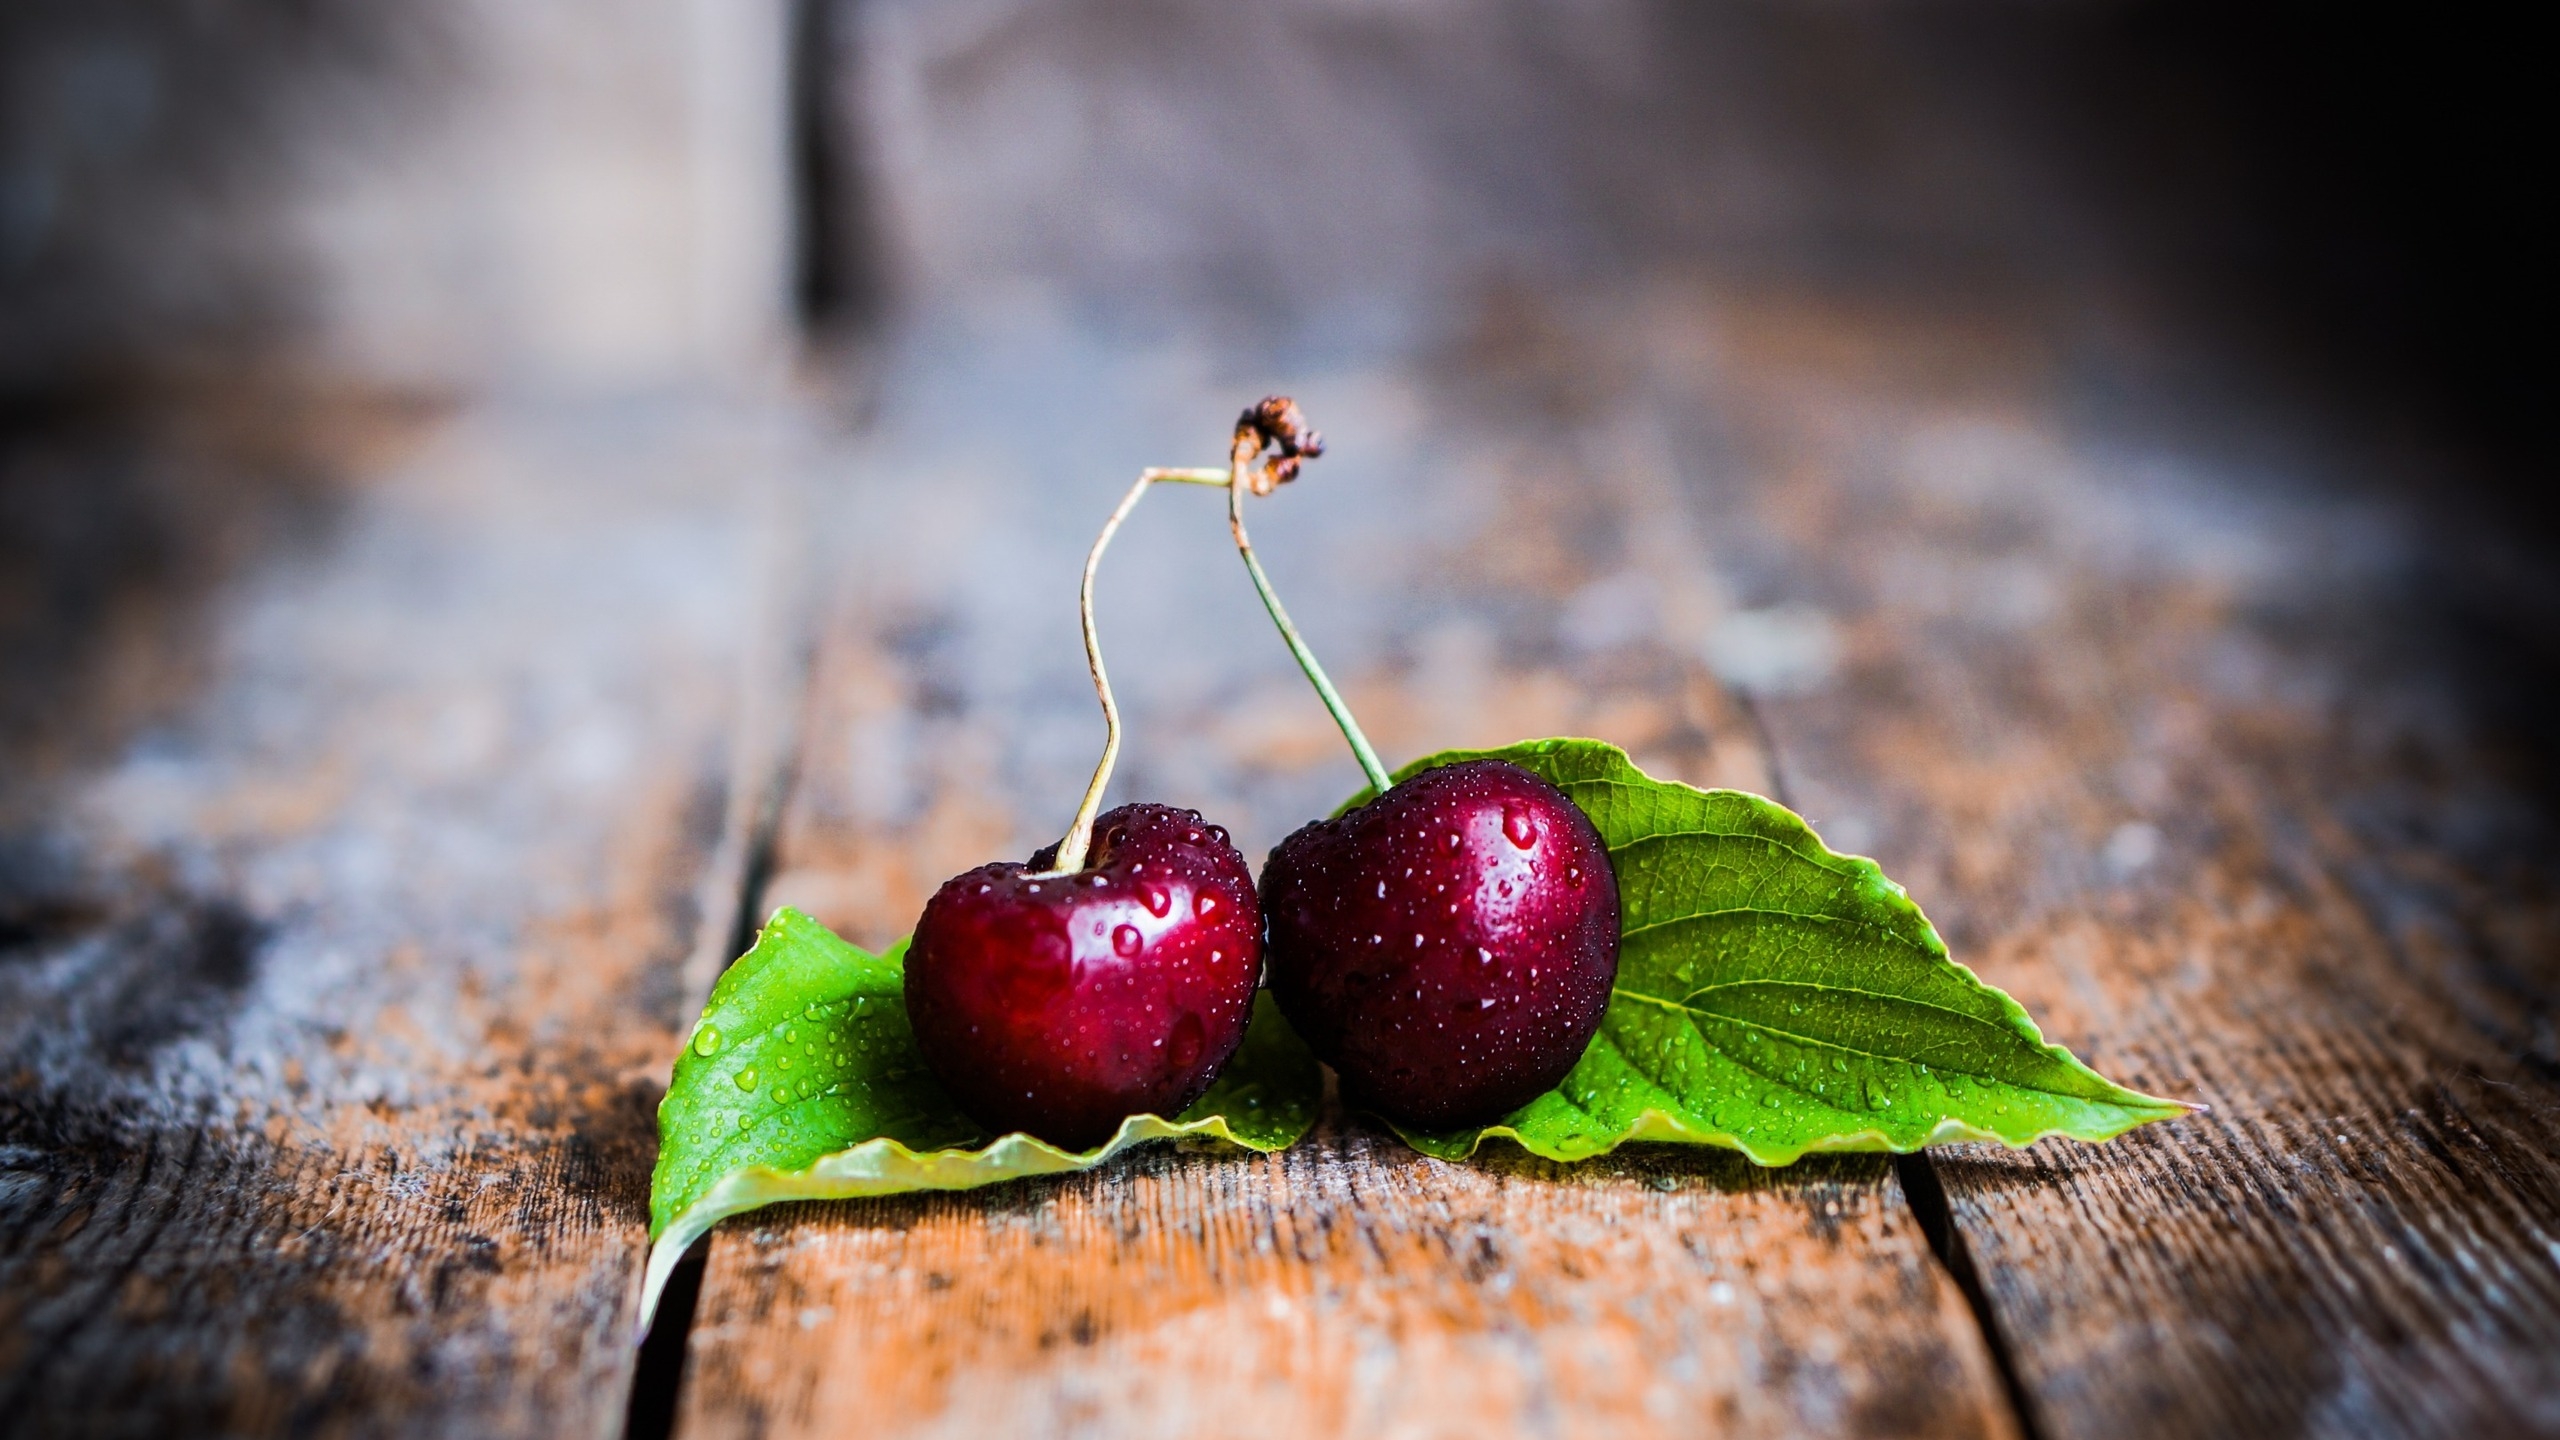 Two Cherries with Leaves for 2560x1440 HDTV resolution